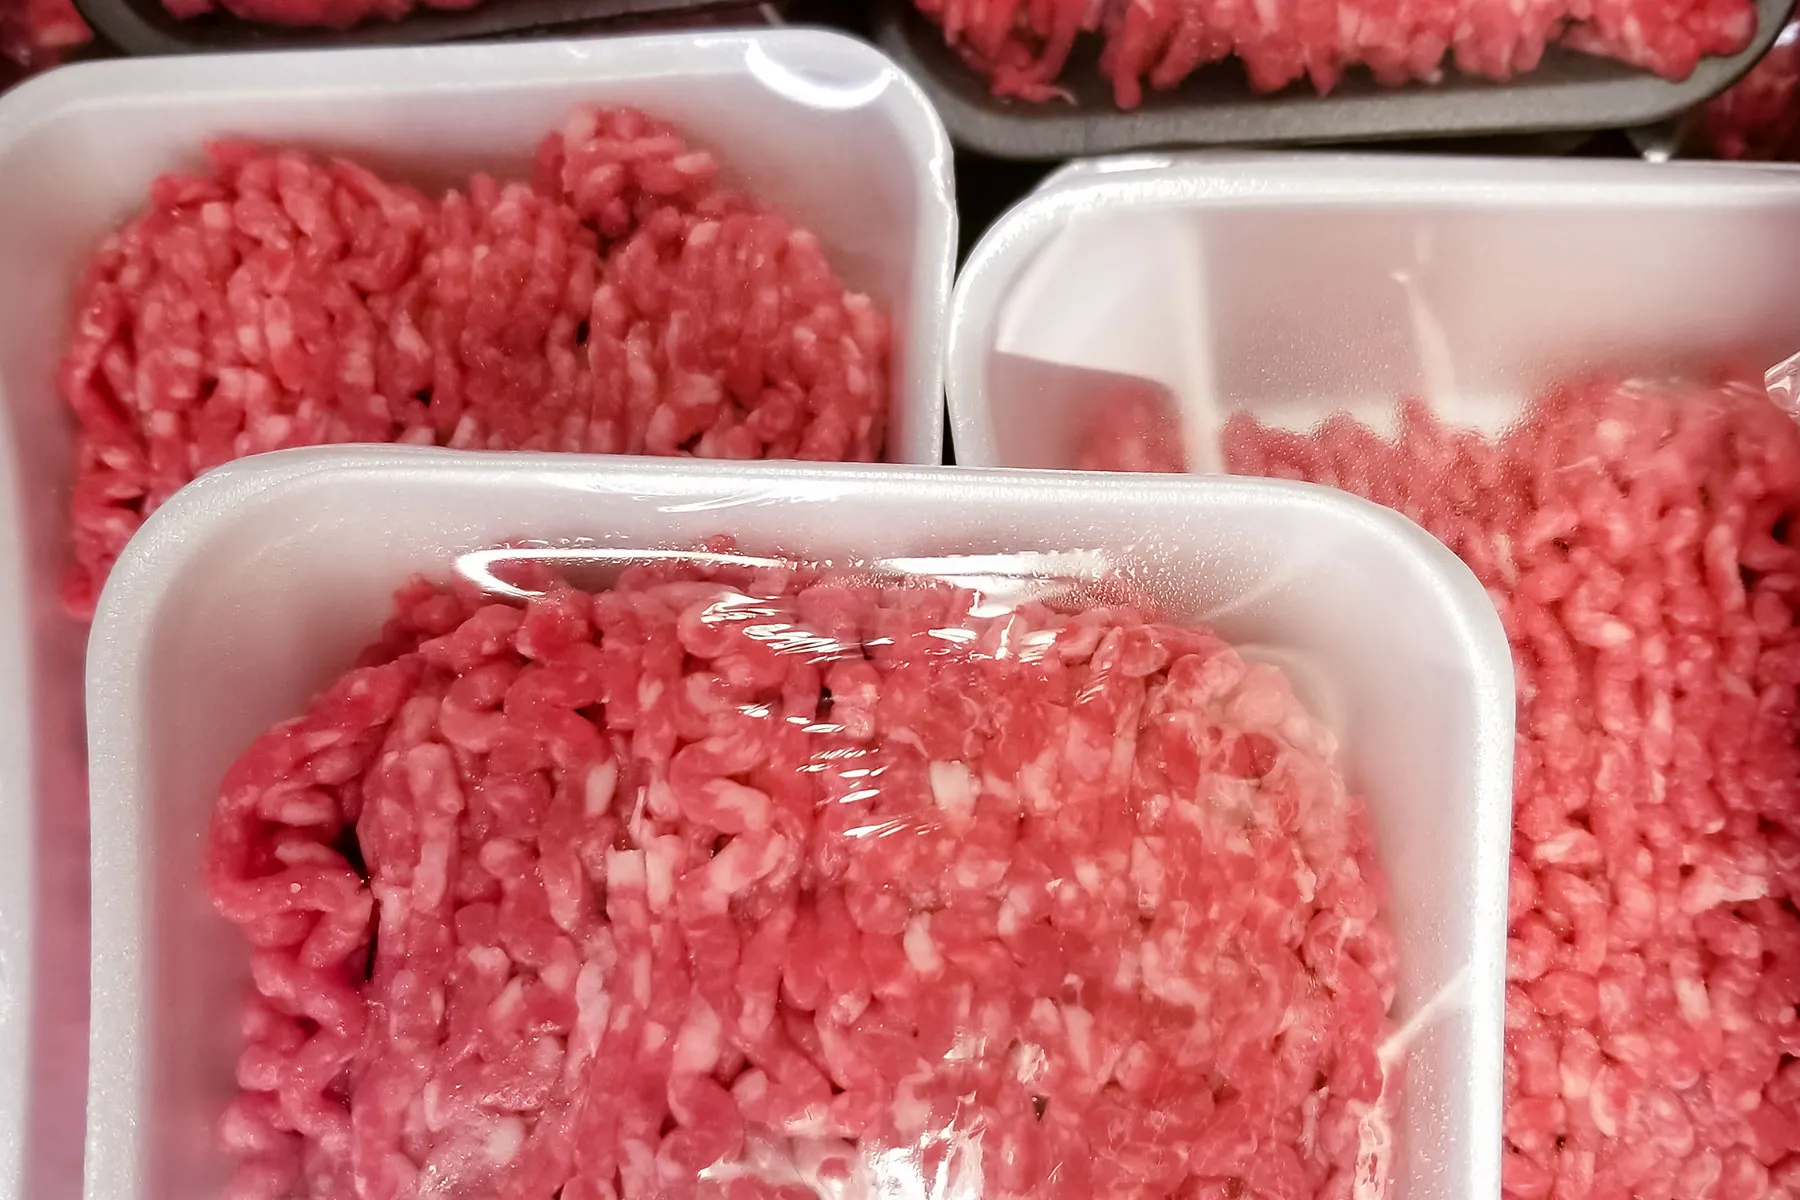 Meat Company Recalls 28,000 Pounds of Ground Beef thumbnail